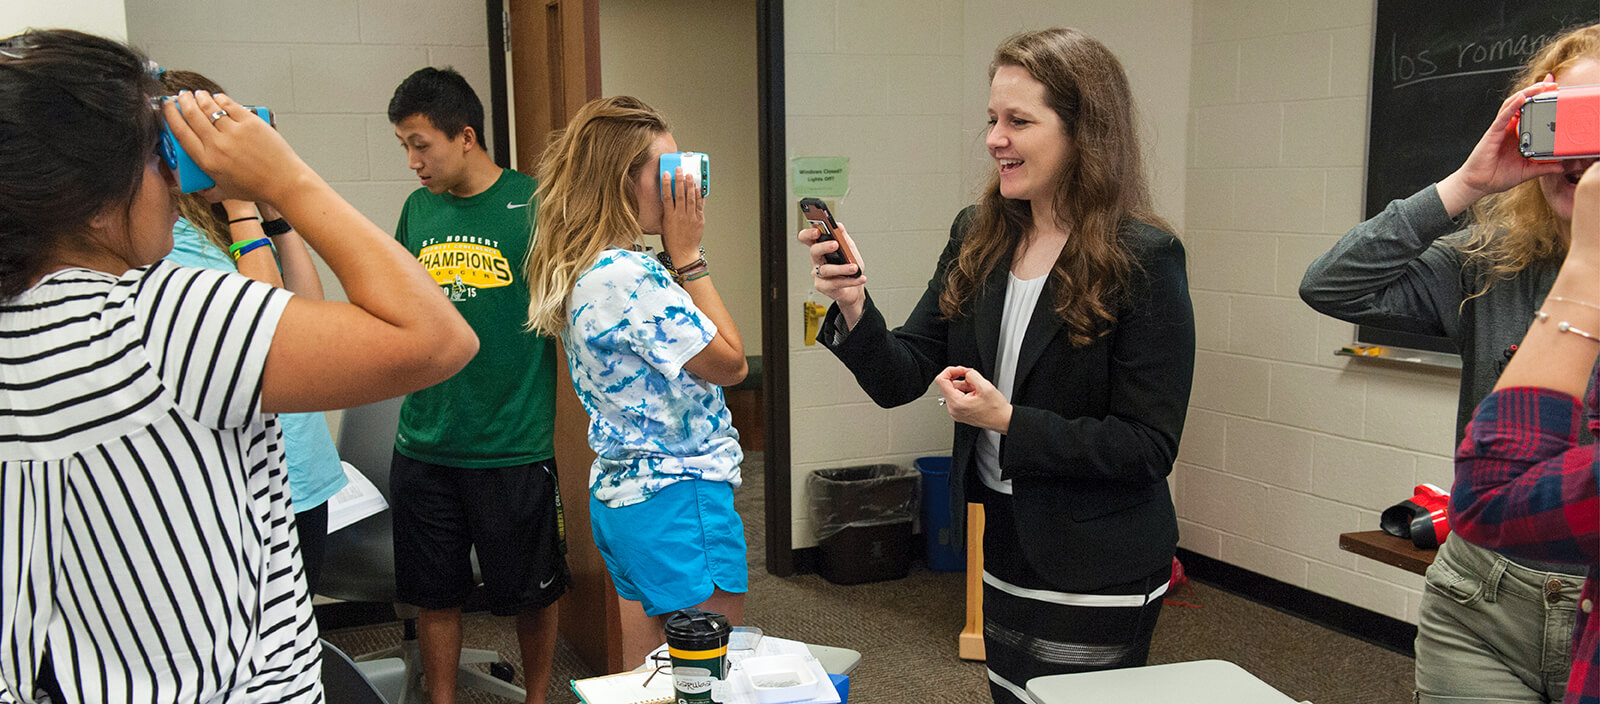 Professor Katie Ginsbach holding a mobile device as part of a teaching exercise.